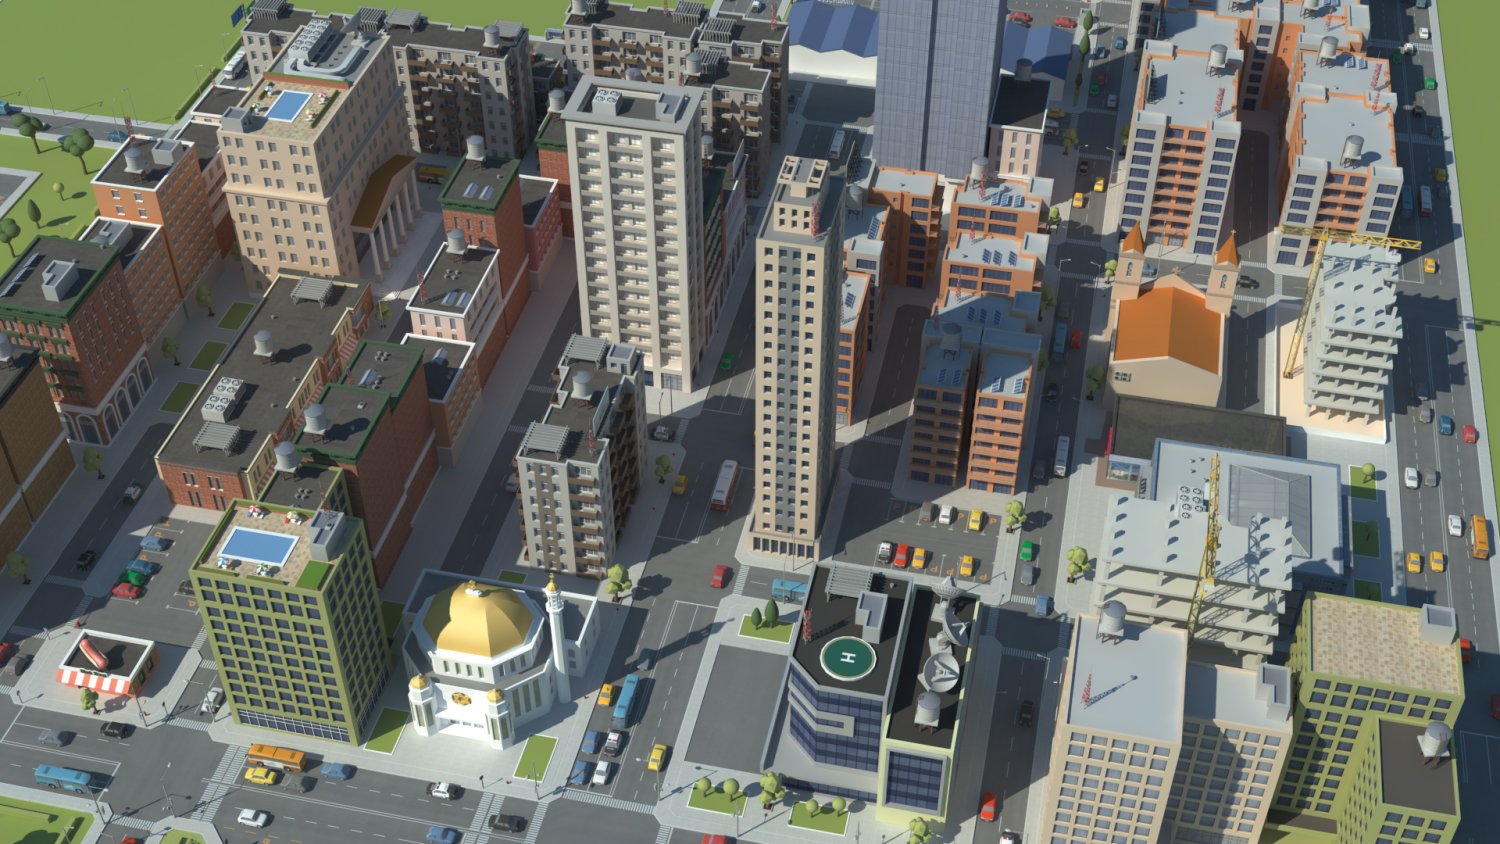 Realistic Lowpoly Simple City 3d Model In Cityscapes 3dexport